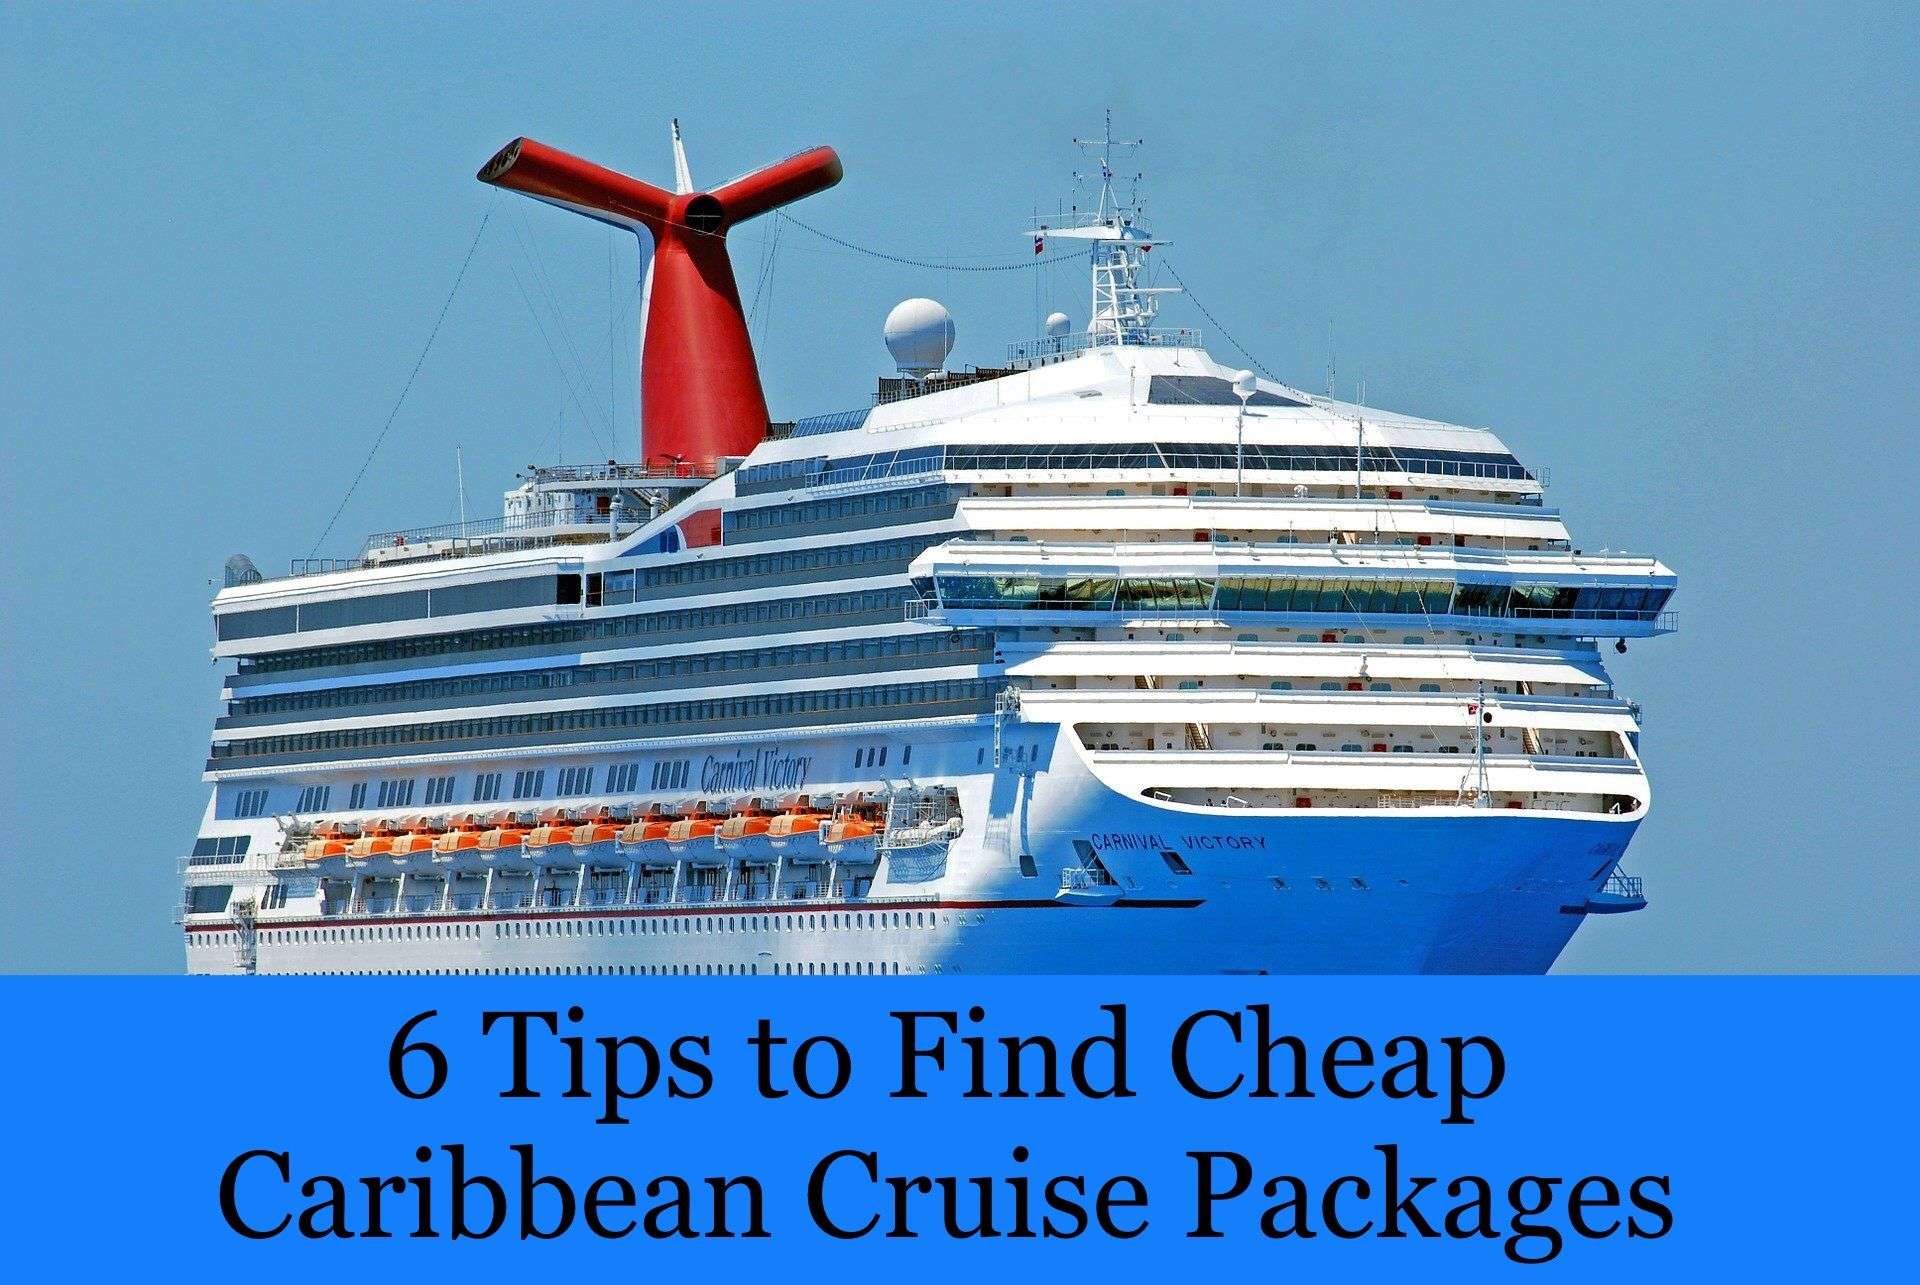 6 Tips to Find Cheap Caribbean Cruise Packages